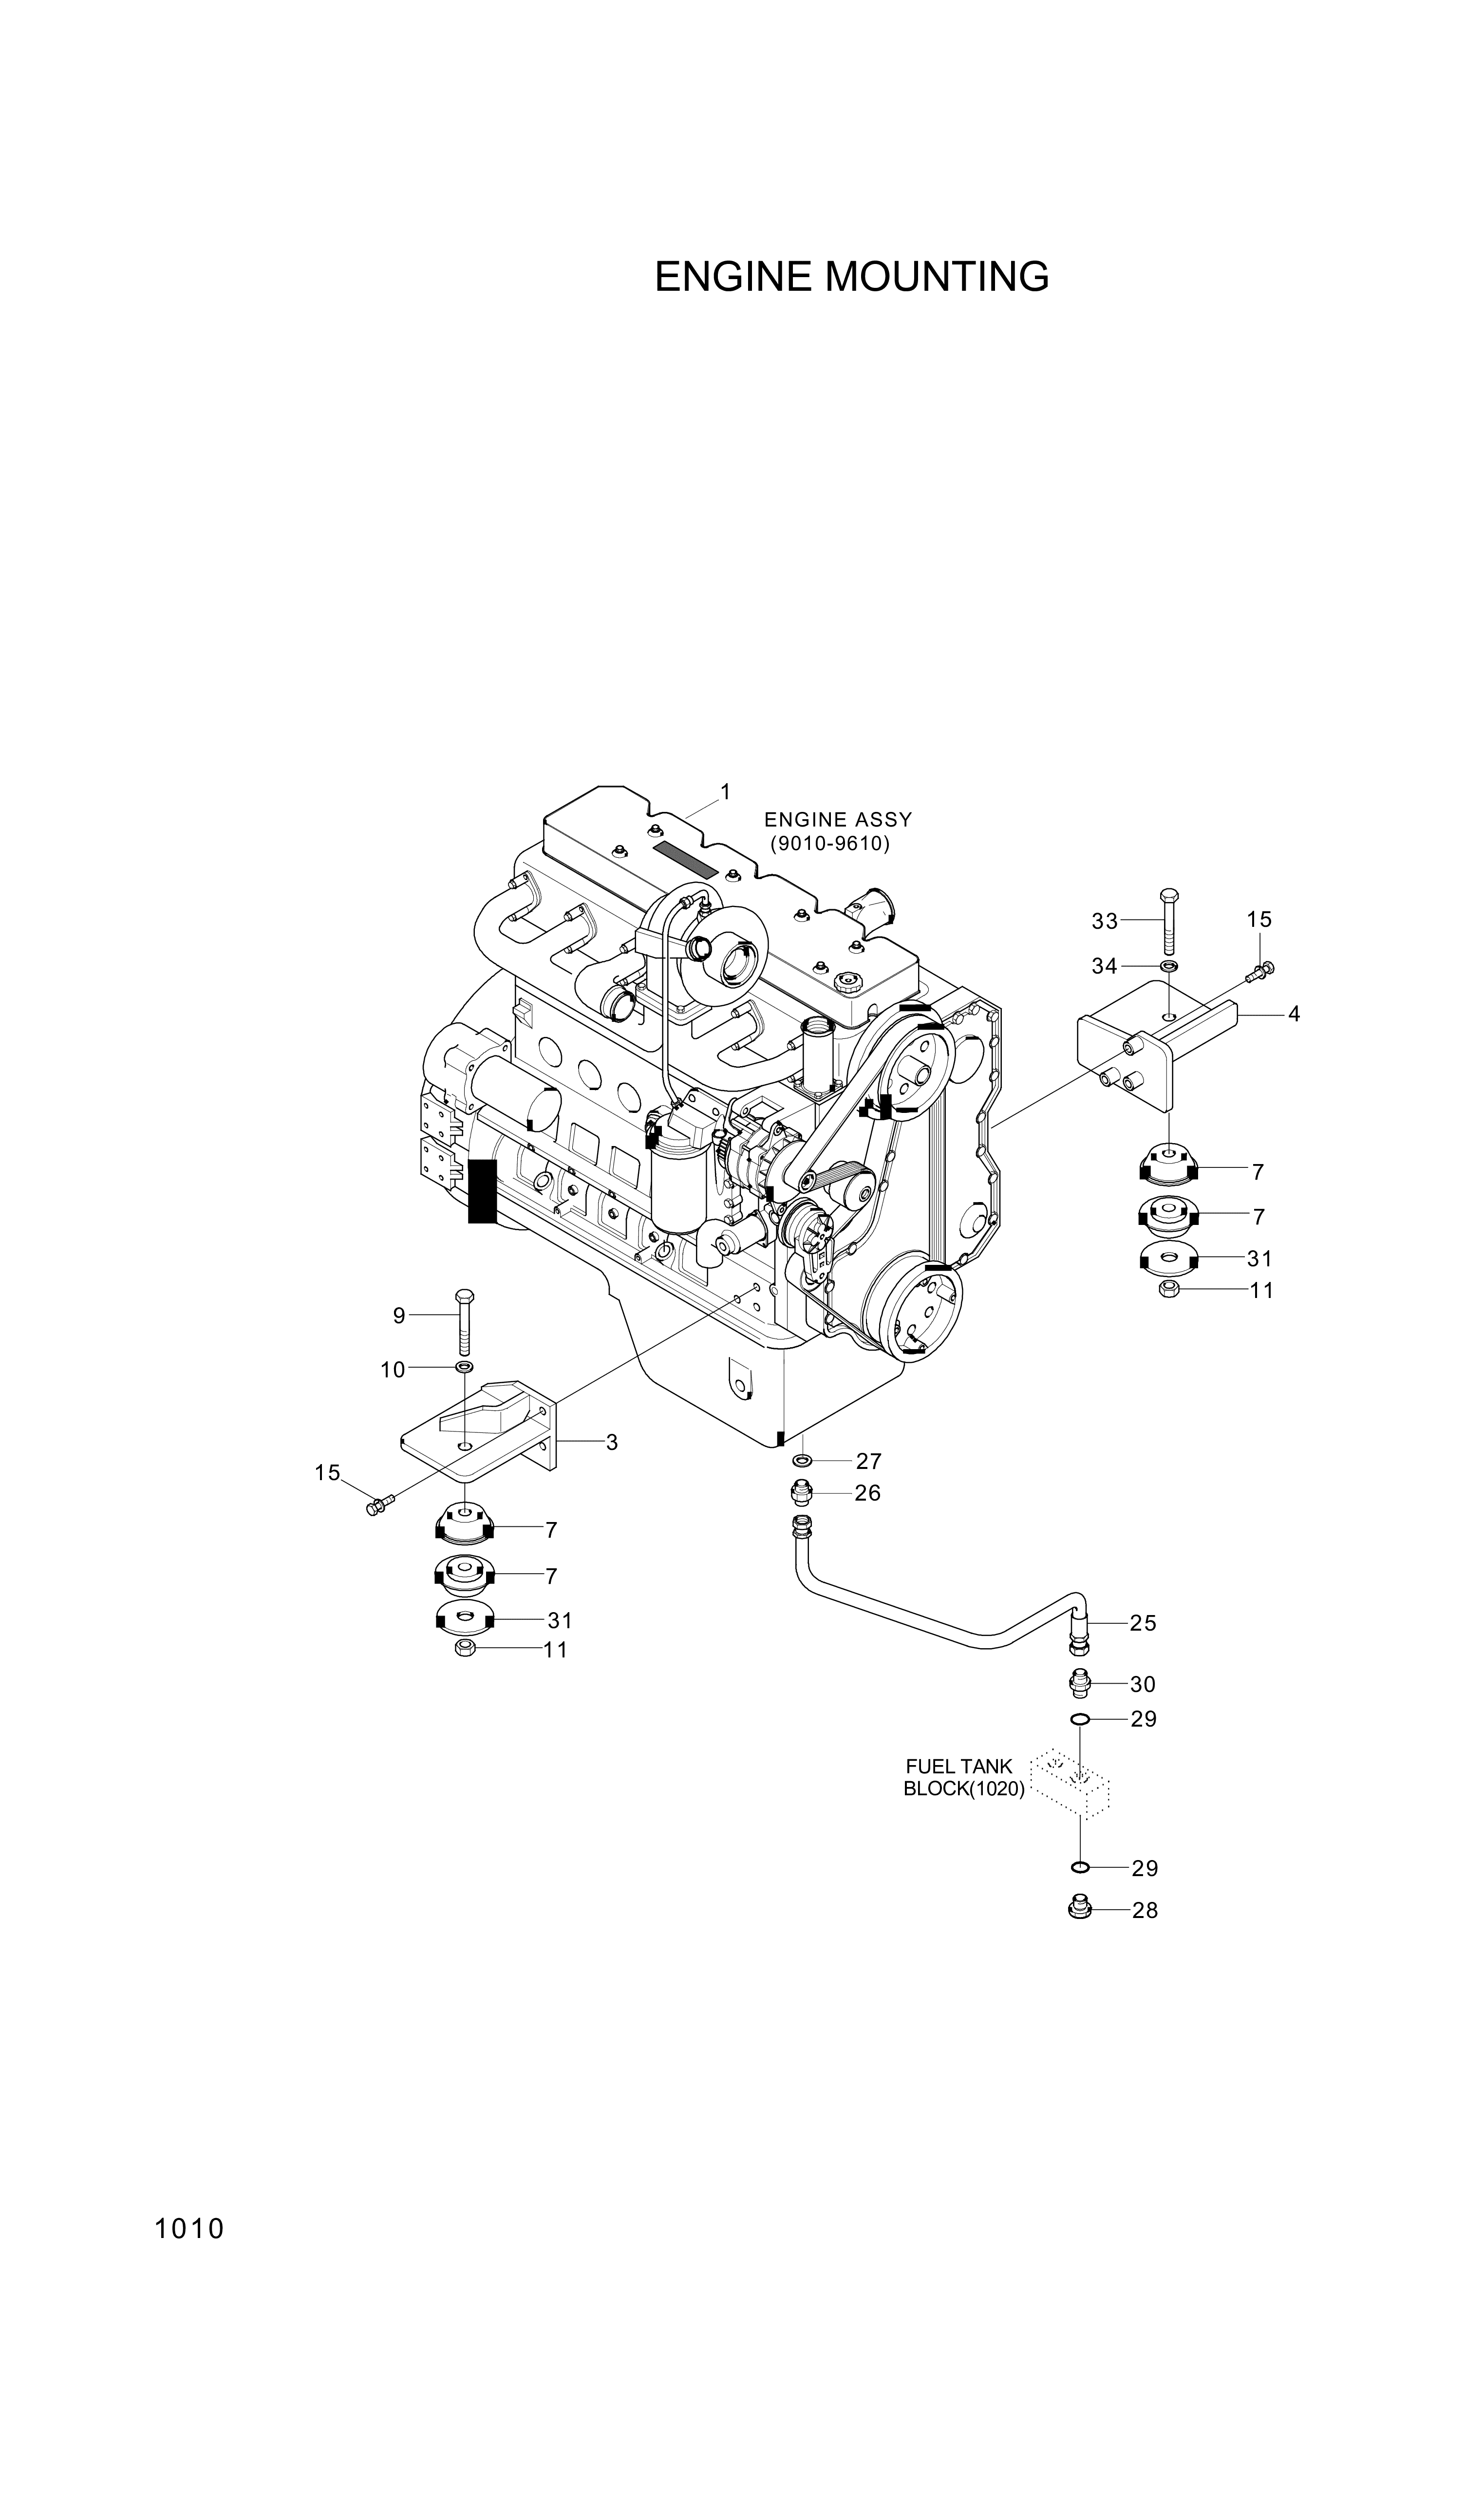 drawing for Hyundai Construction Equipment 11LC-01000 - ENGINE ASSY (figure 1)